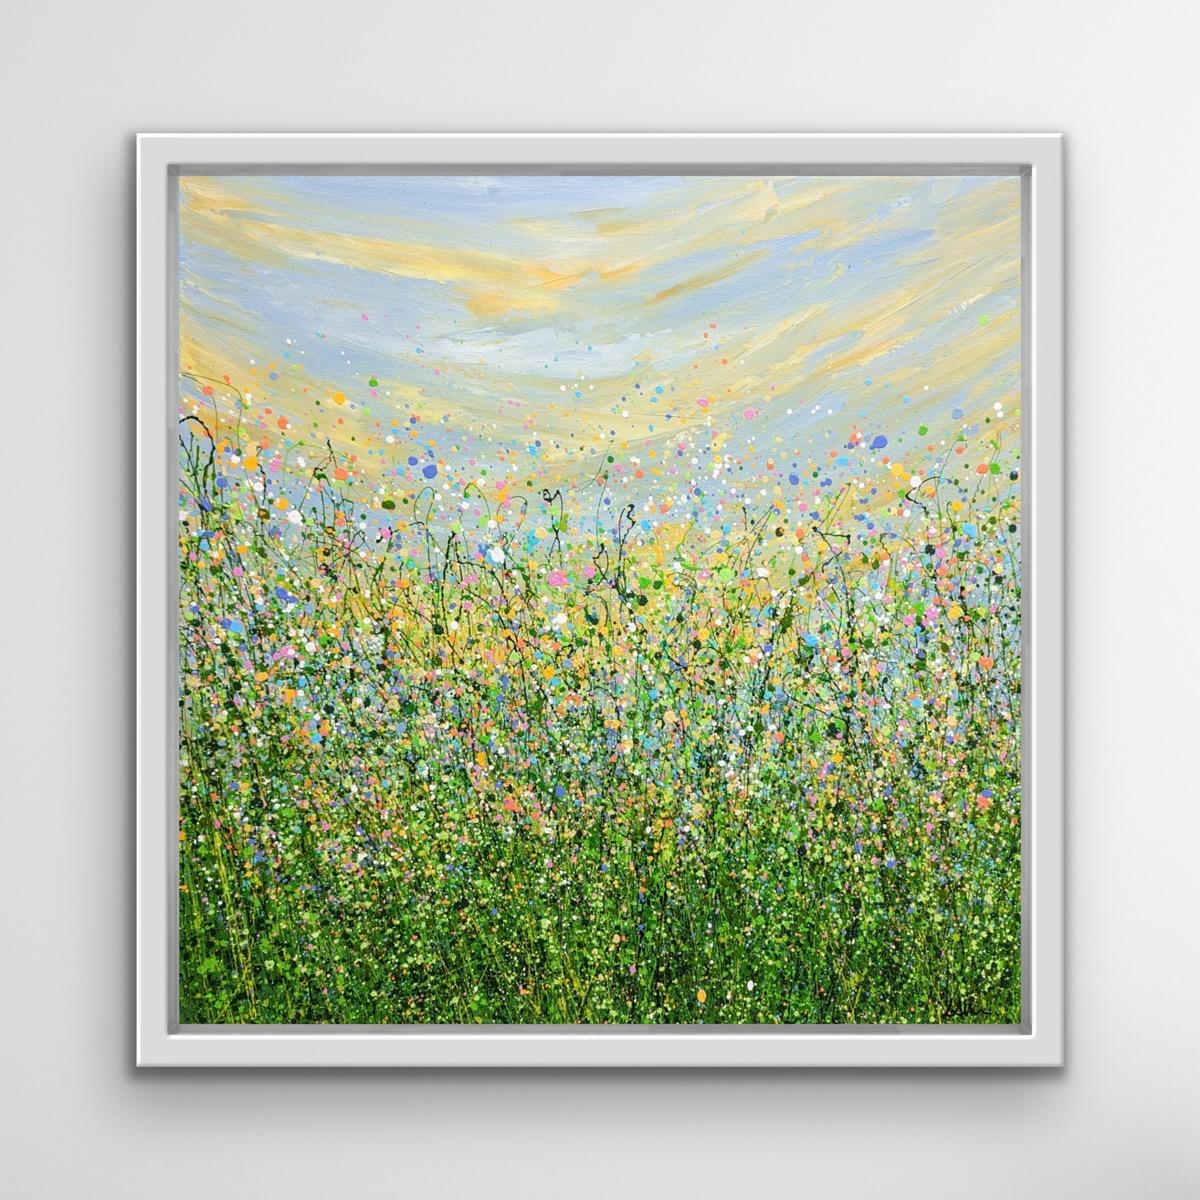 What's The Story Morning Glory - An Original semi-abstract painting by Lucy Moore. Using her signature string grass technique Lucy has created a semi-abstract twist to her classic meadow paintings. Colourful pastels flowers beneath a sunlit skyline.